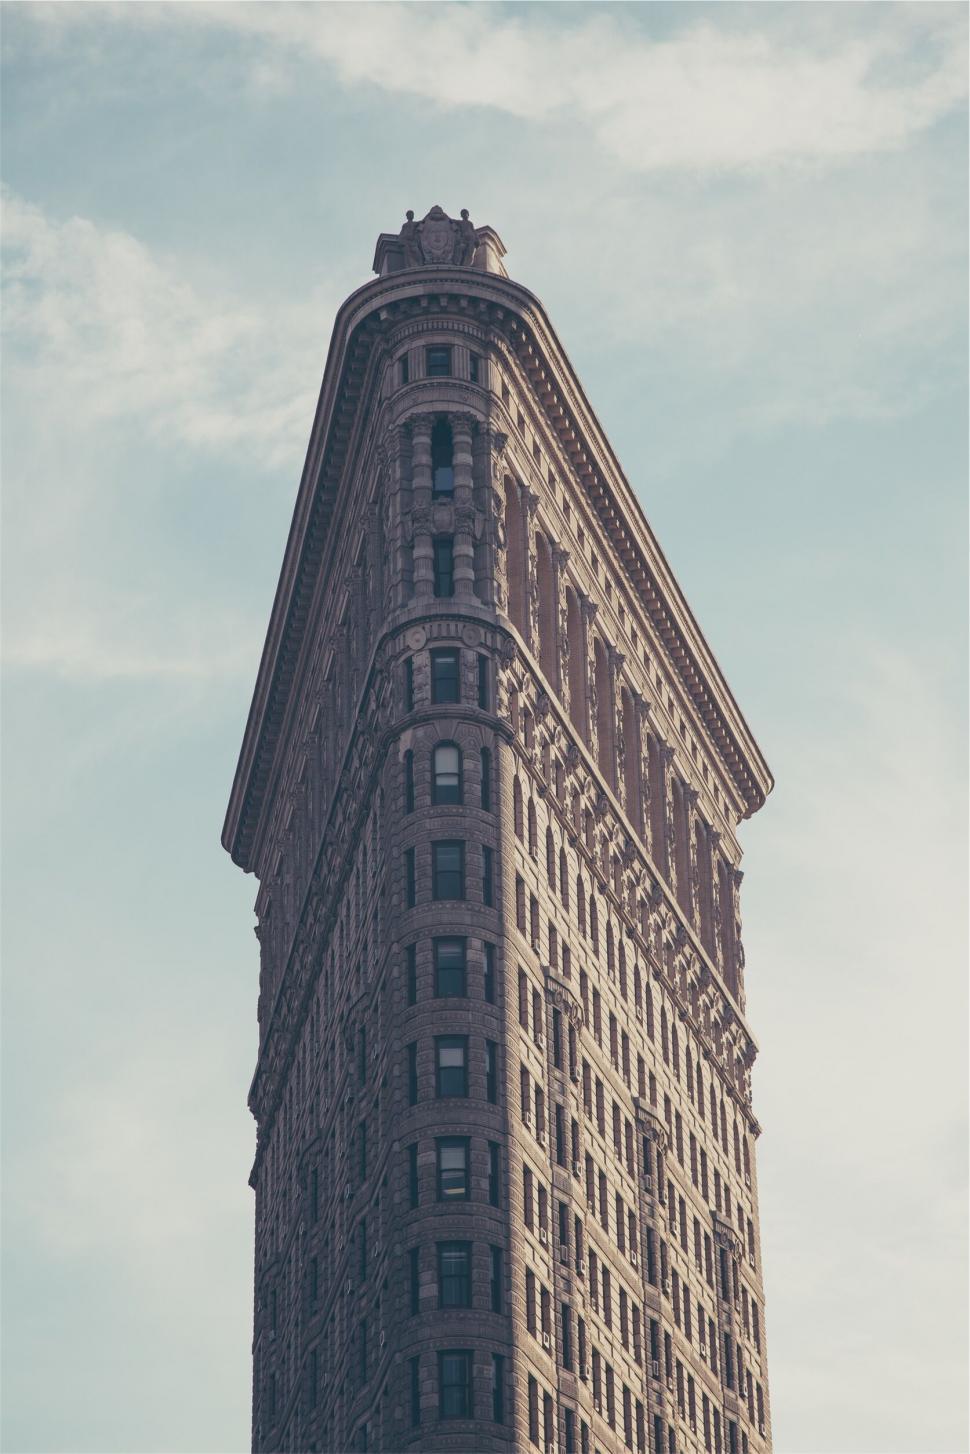 Free Image of A tall building with a spire with flatiron building in the background 